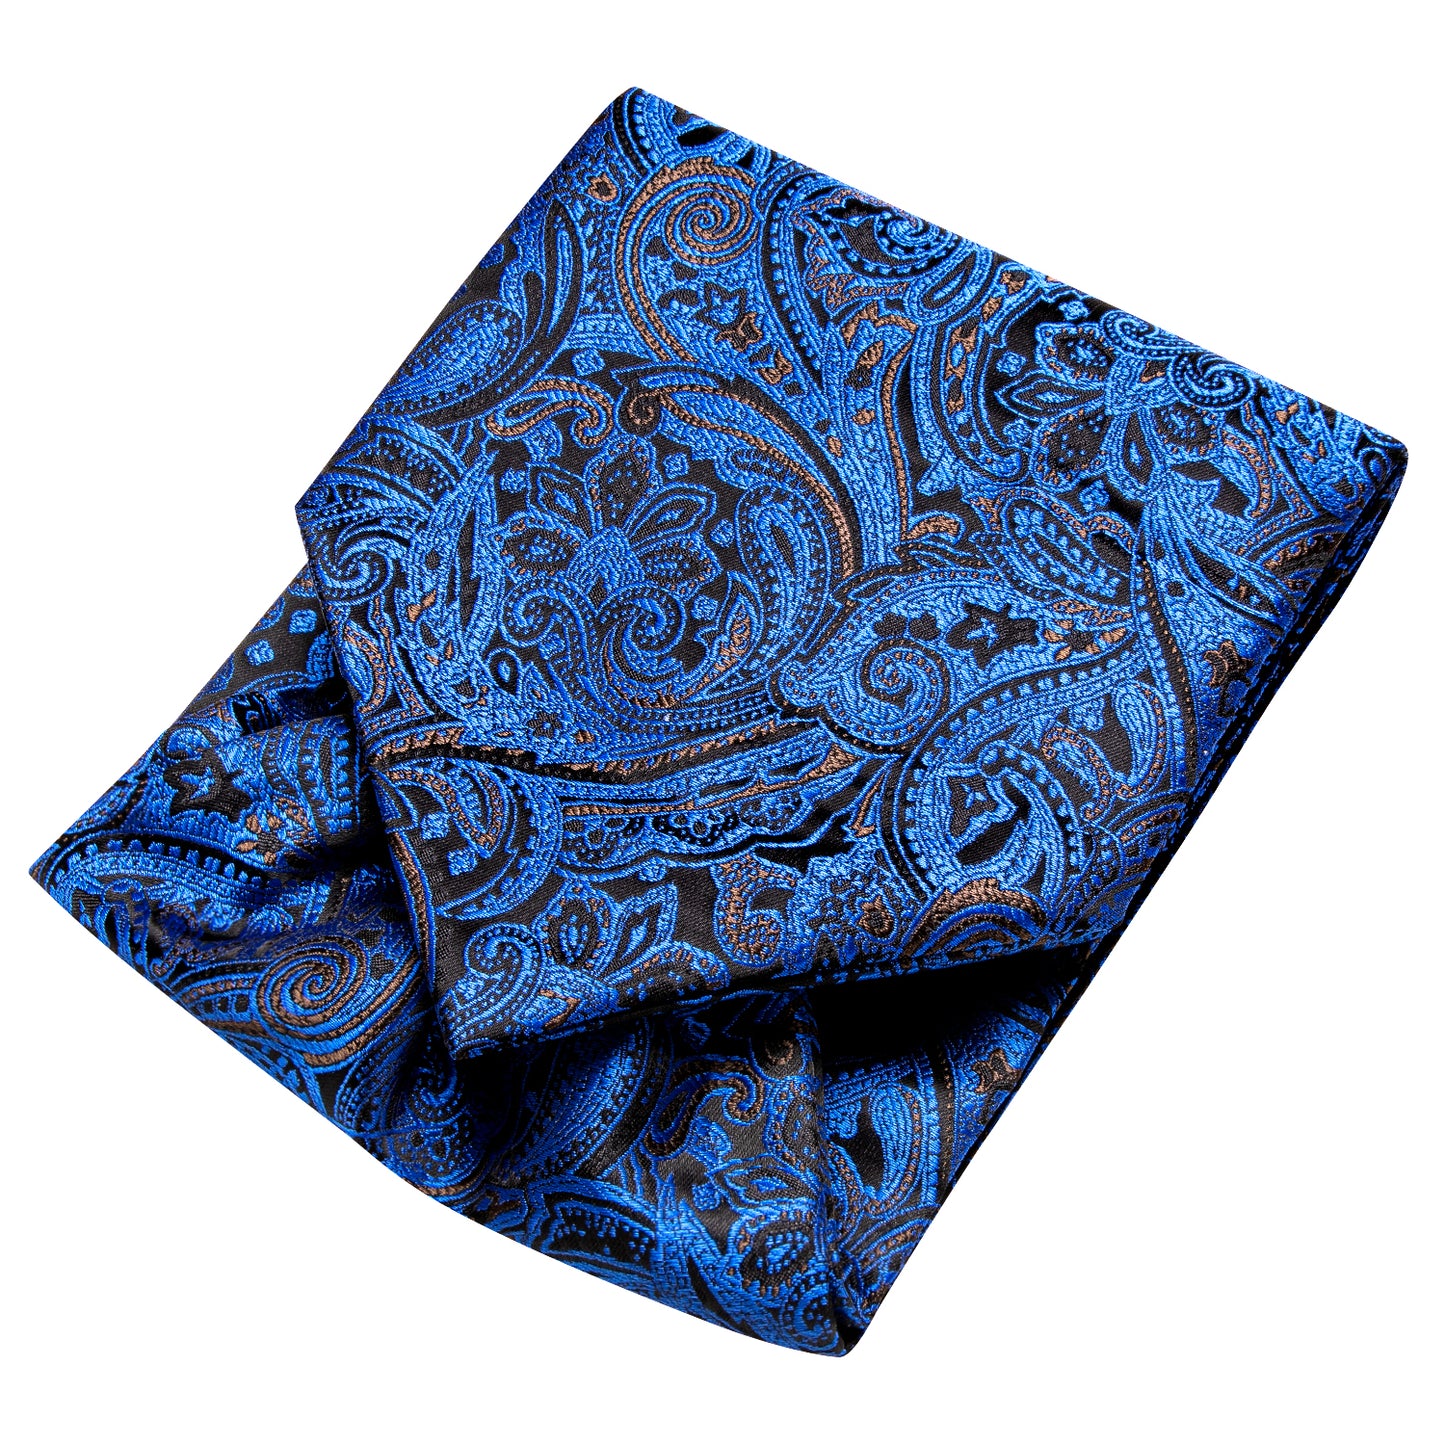 Victorian Ascot Silky Floral Day Cravat Set [Pacific Swirl]